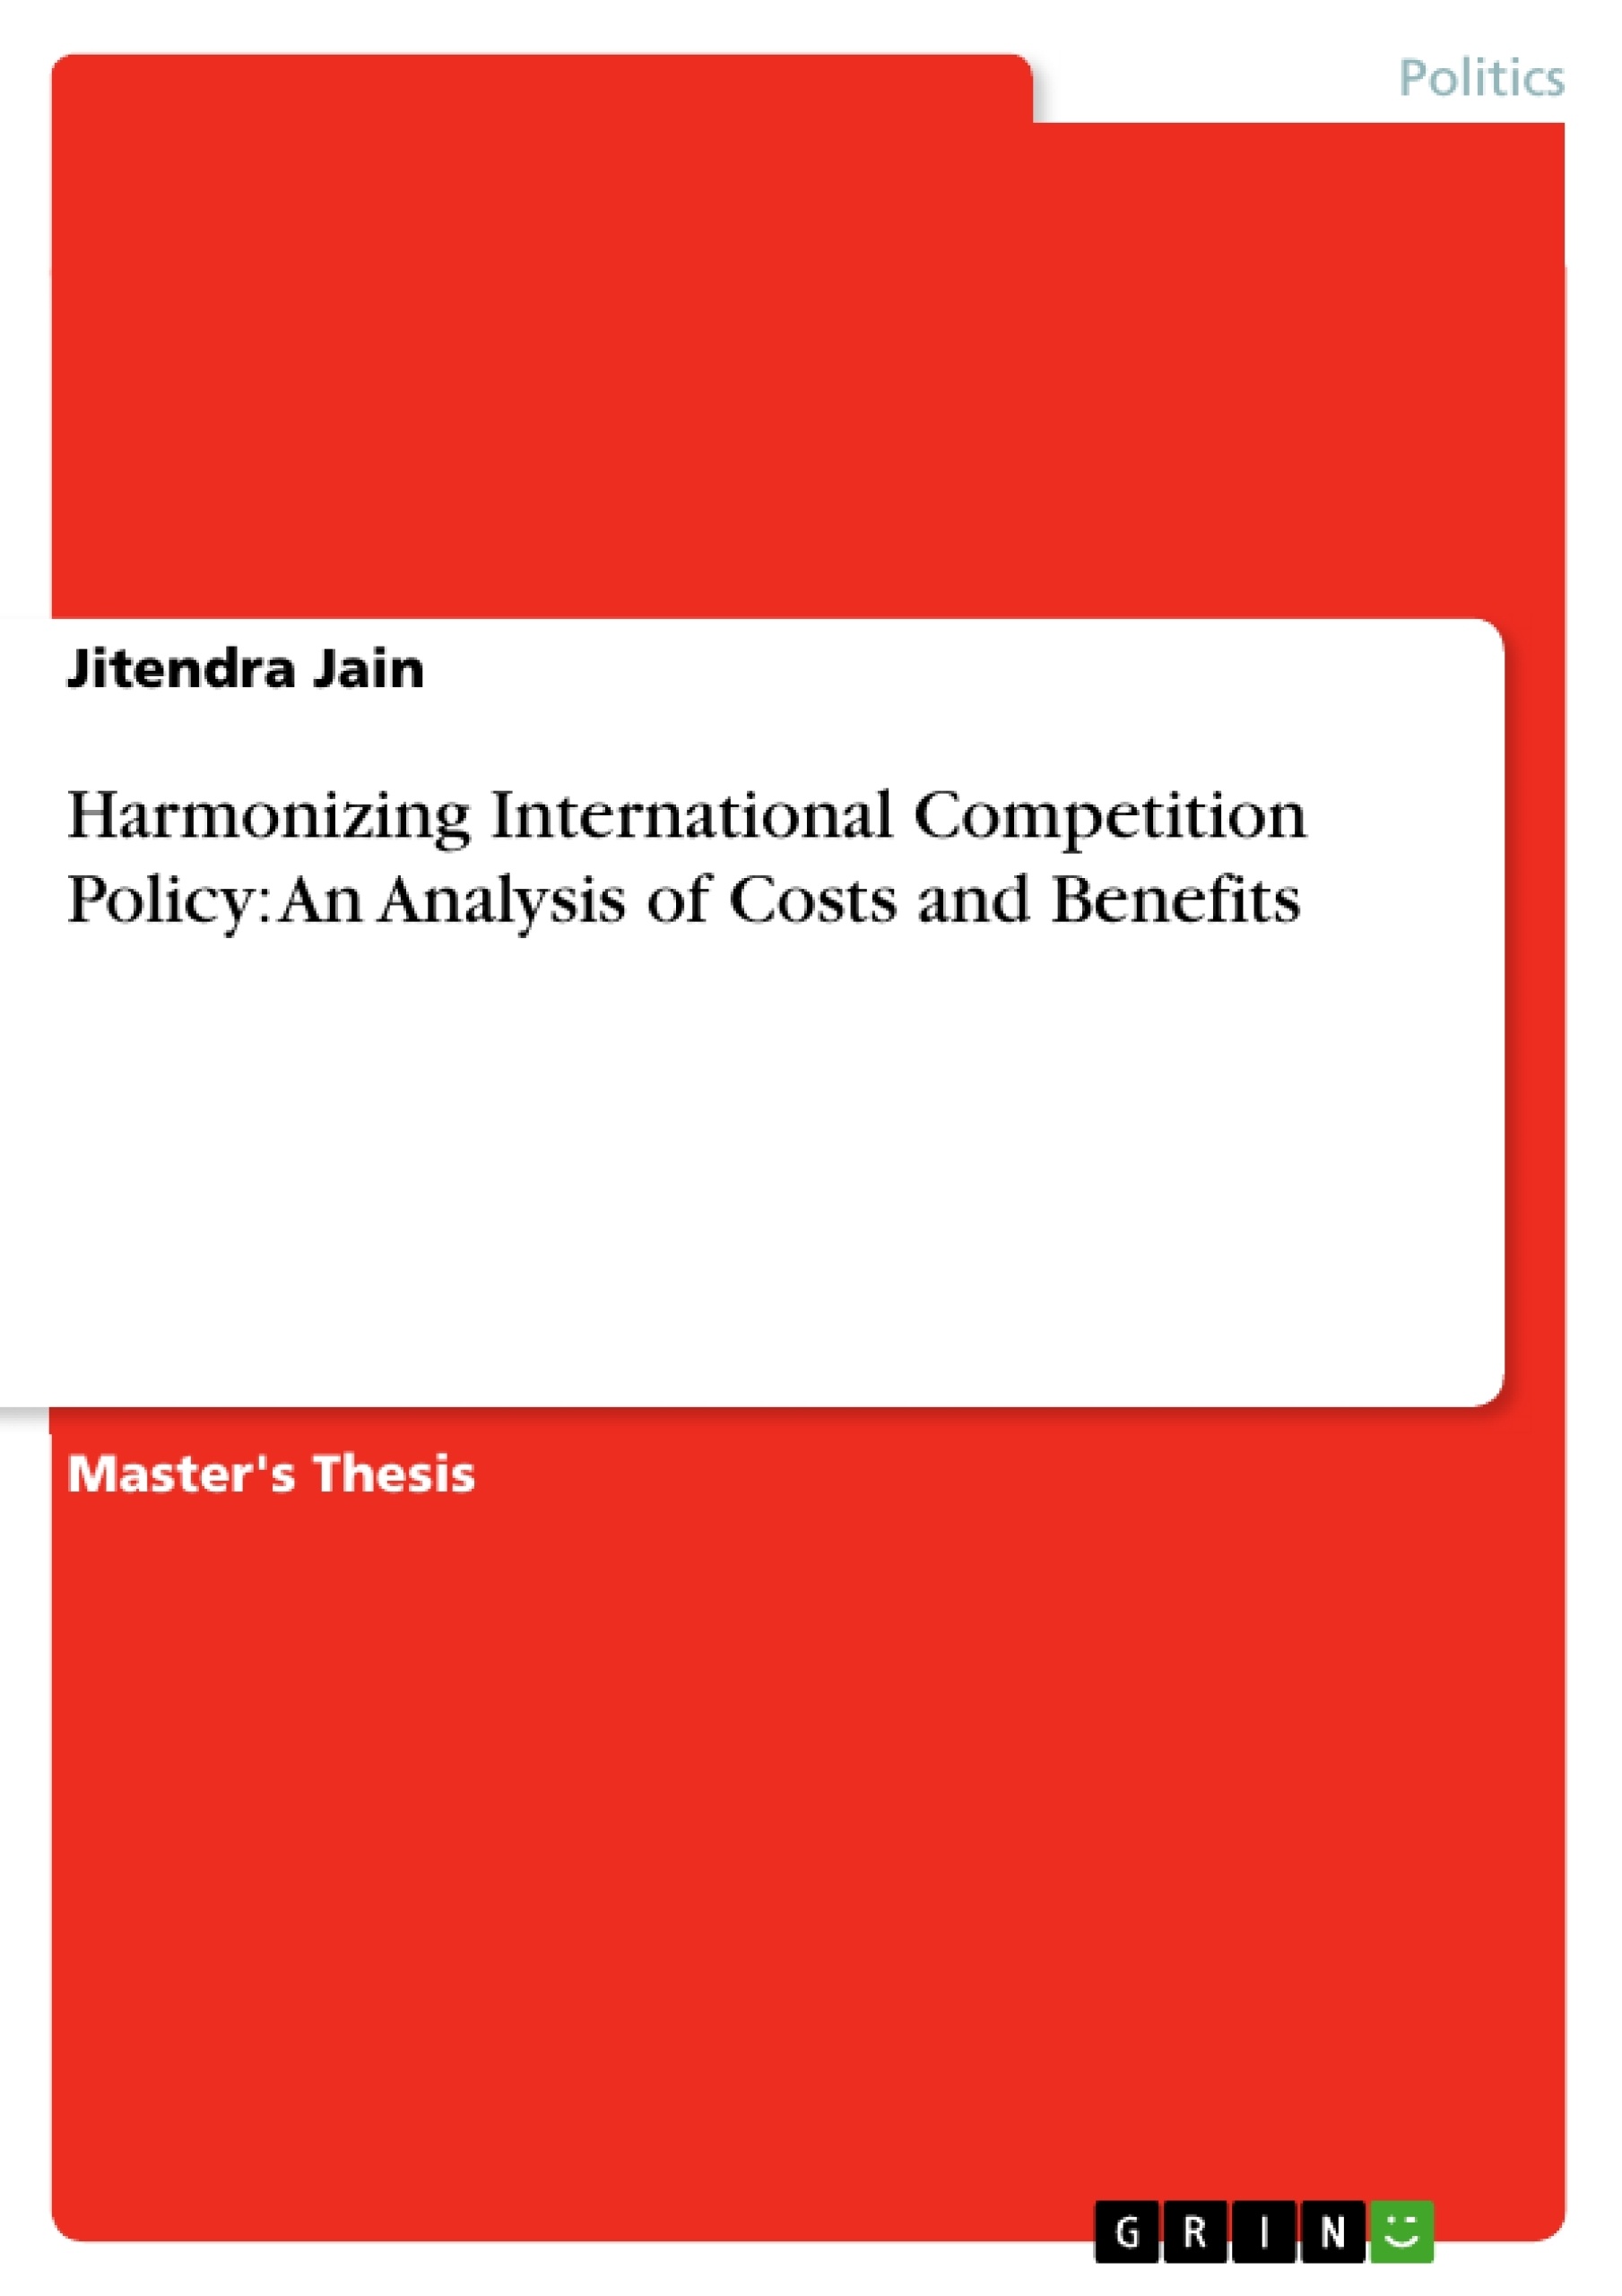 Title: Harmonizing International Competition Policy: An Analysis of Costs and Benefits